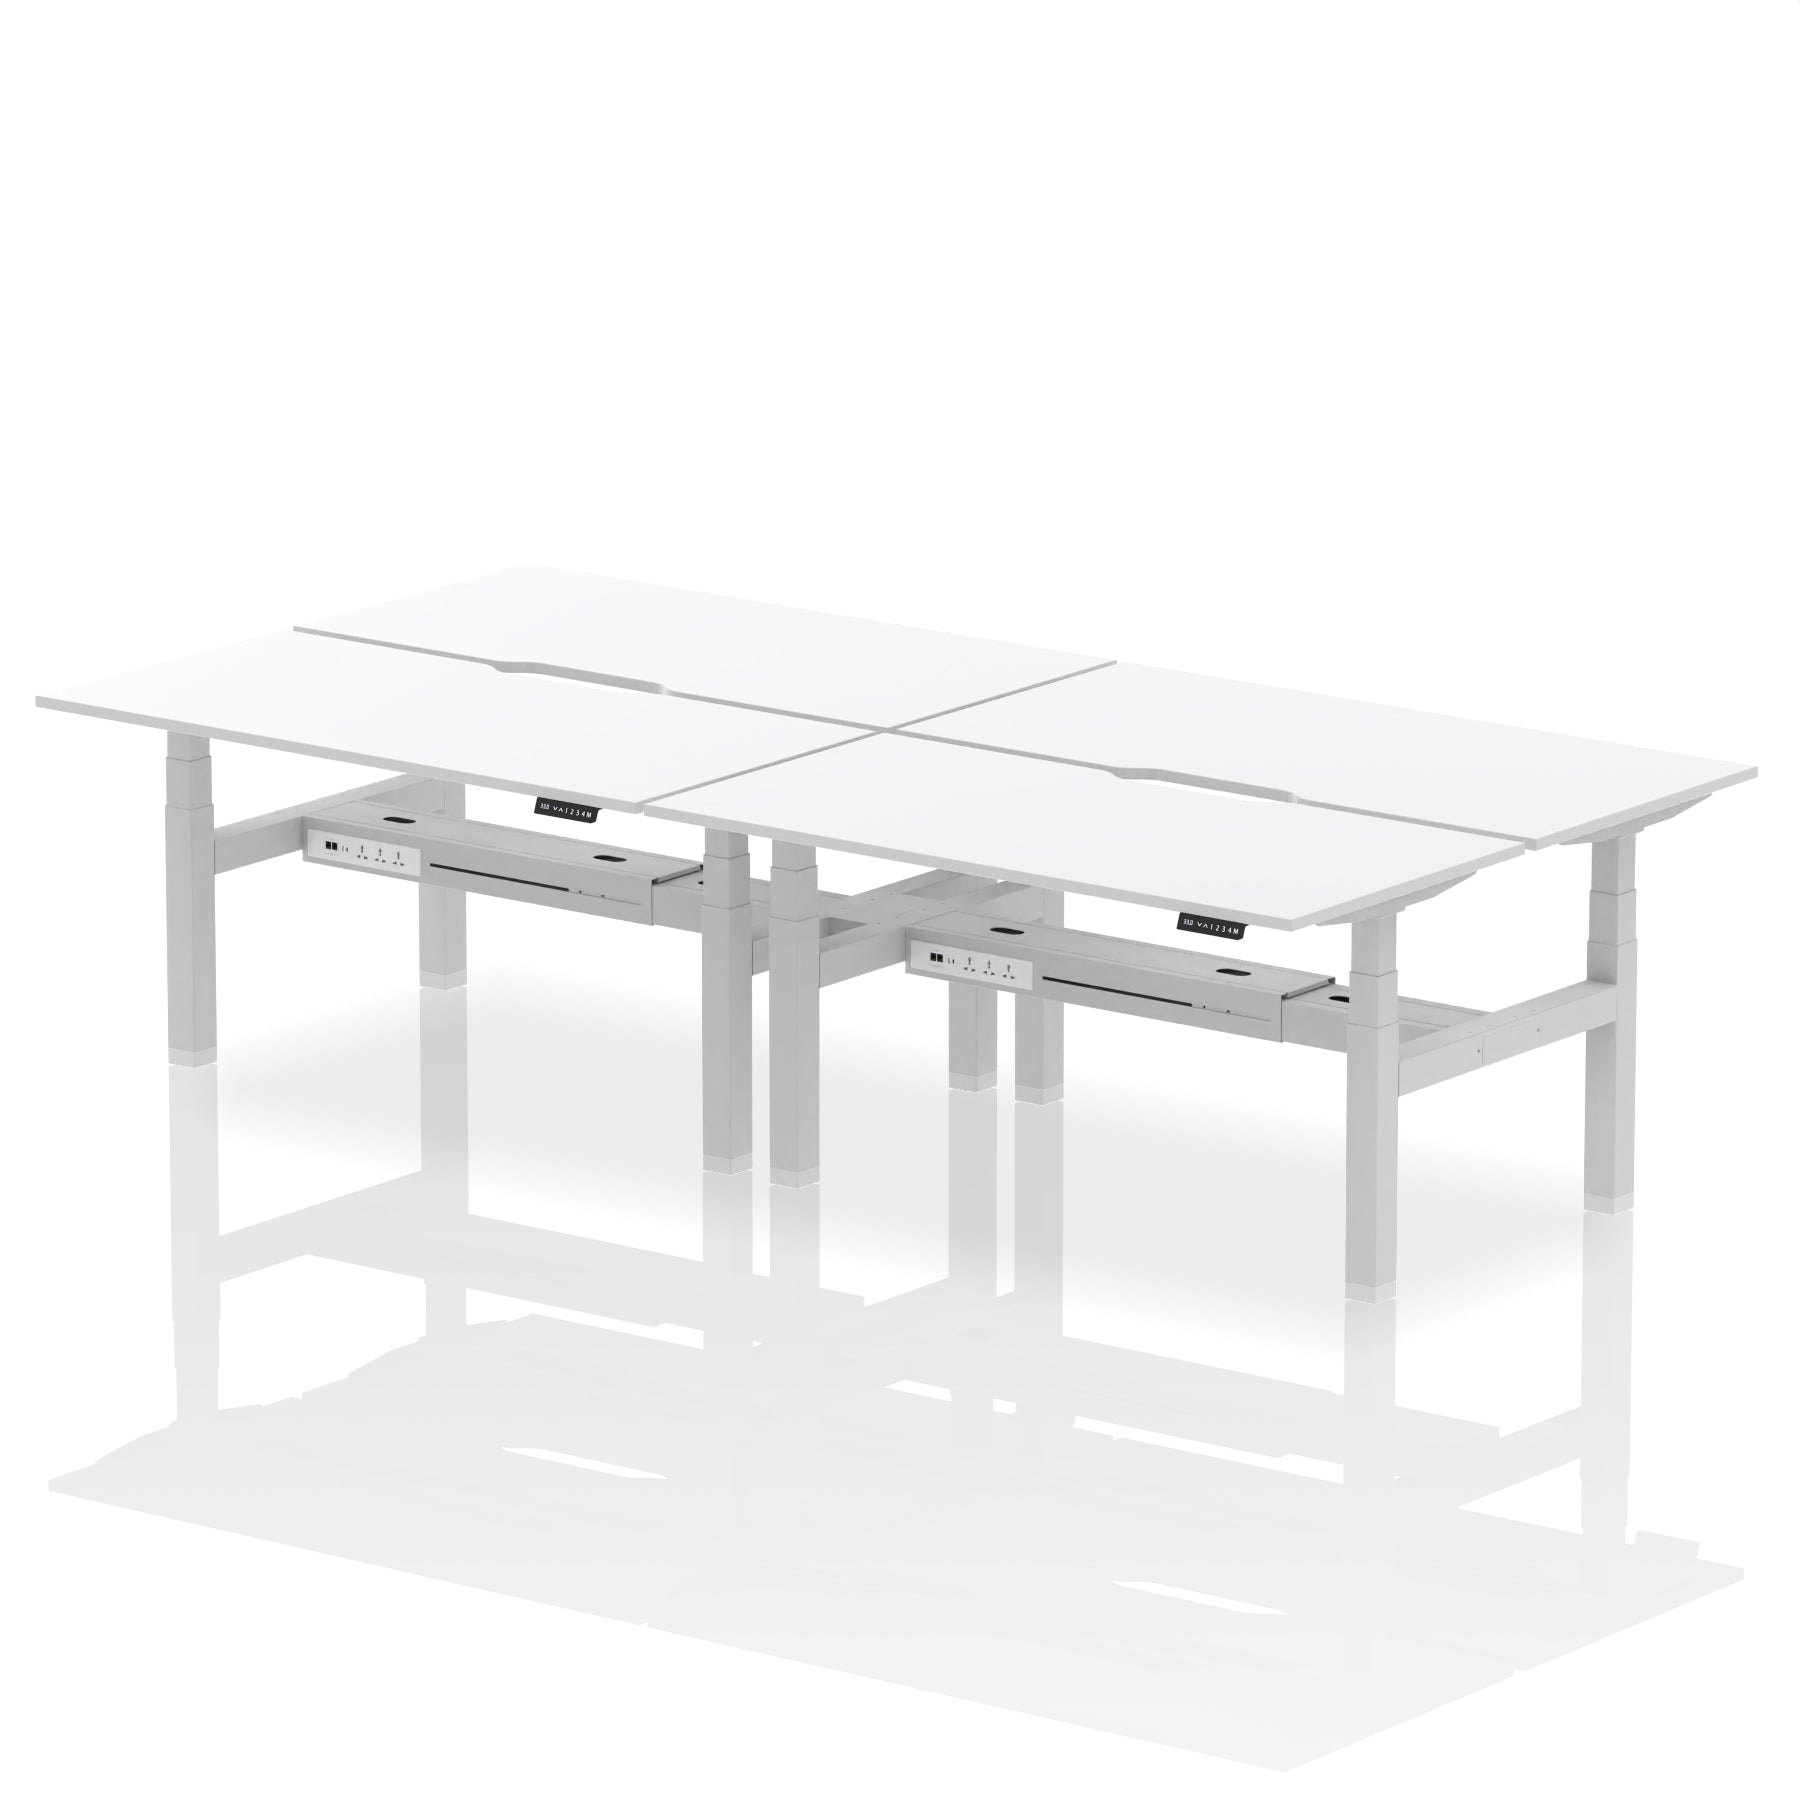 Air Back-to-Back Scalloped Edge Height Adjustable Bench Desk - 4 Person